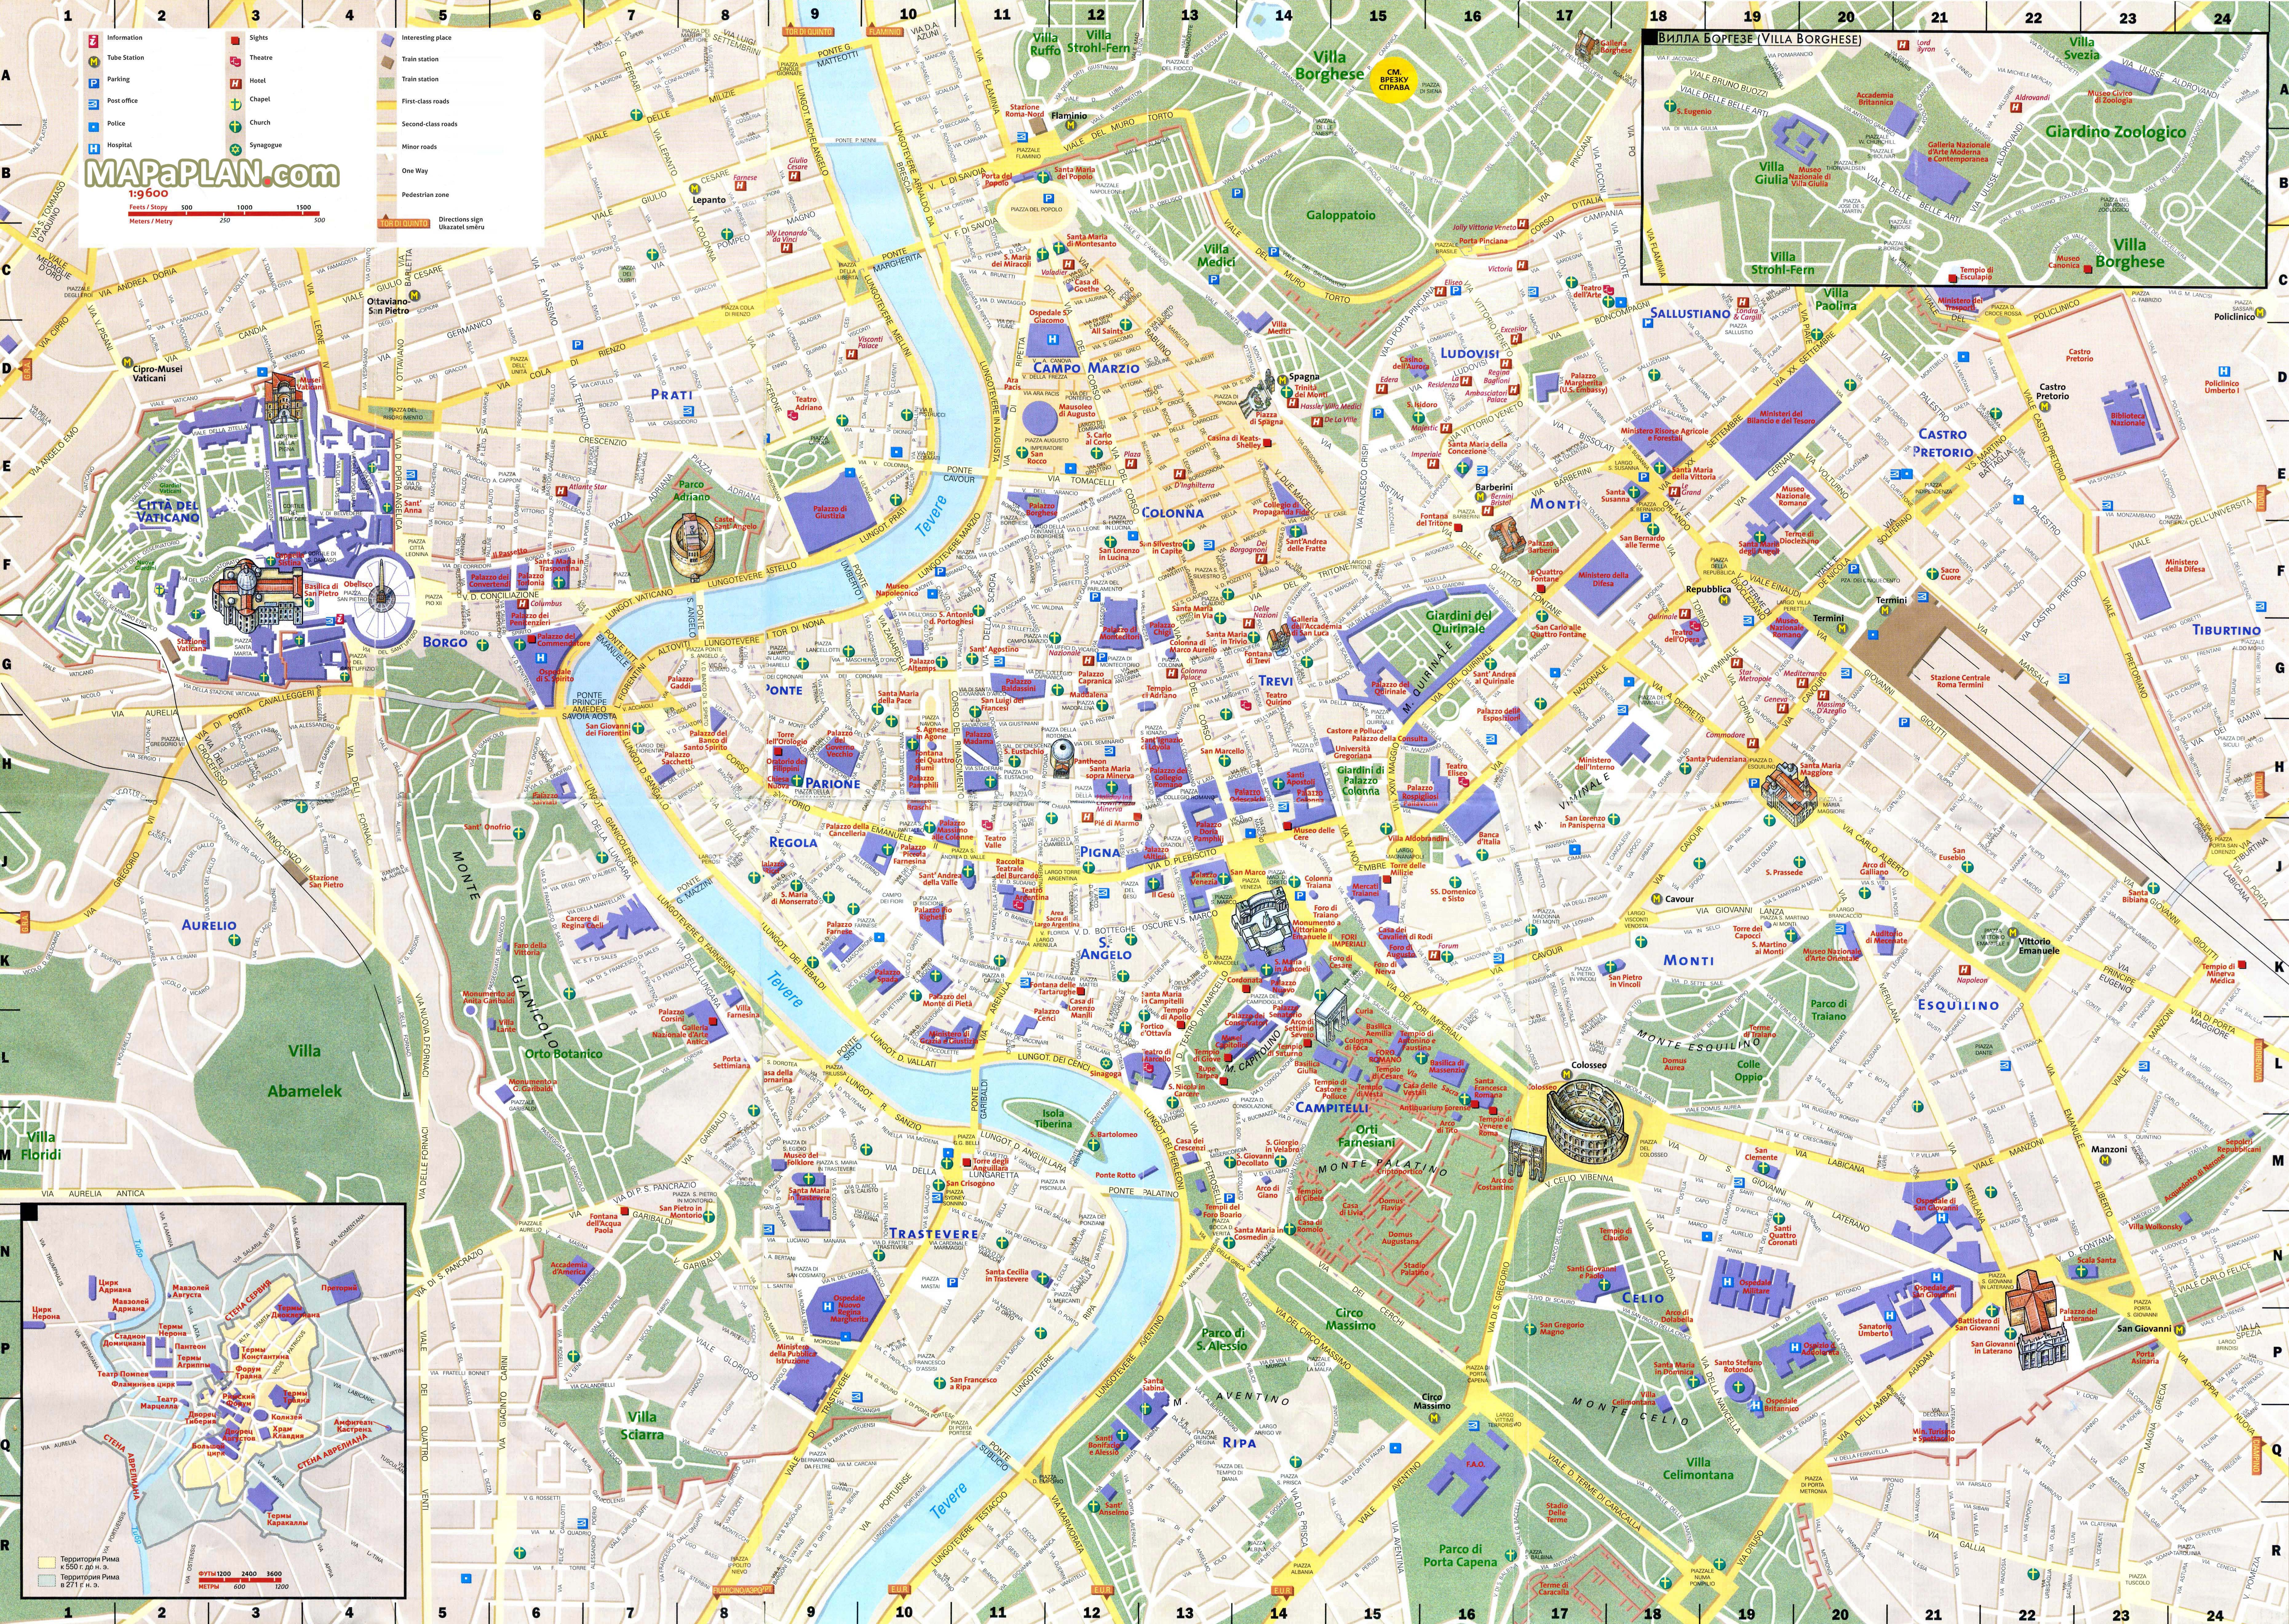 Must see points of interest detailed street guide Rome top tourist attractions map